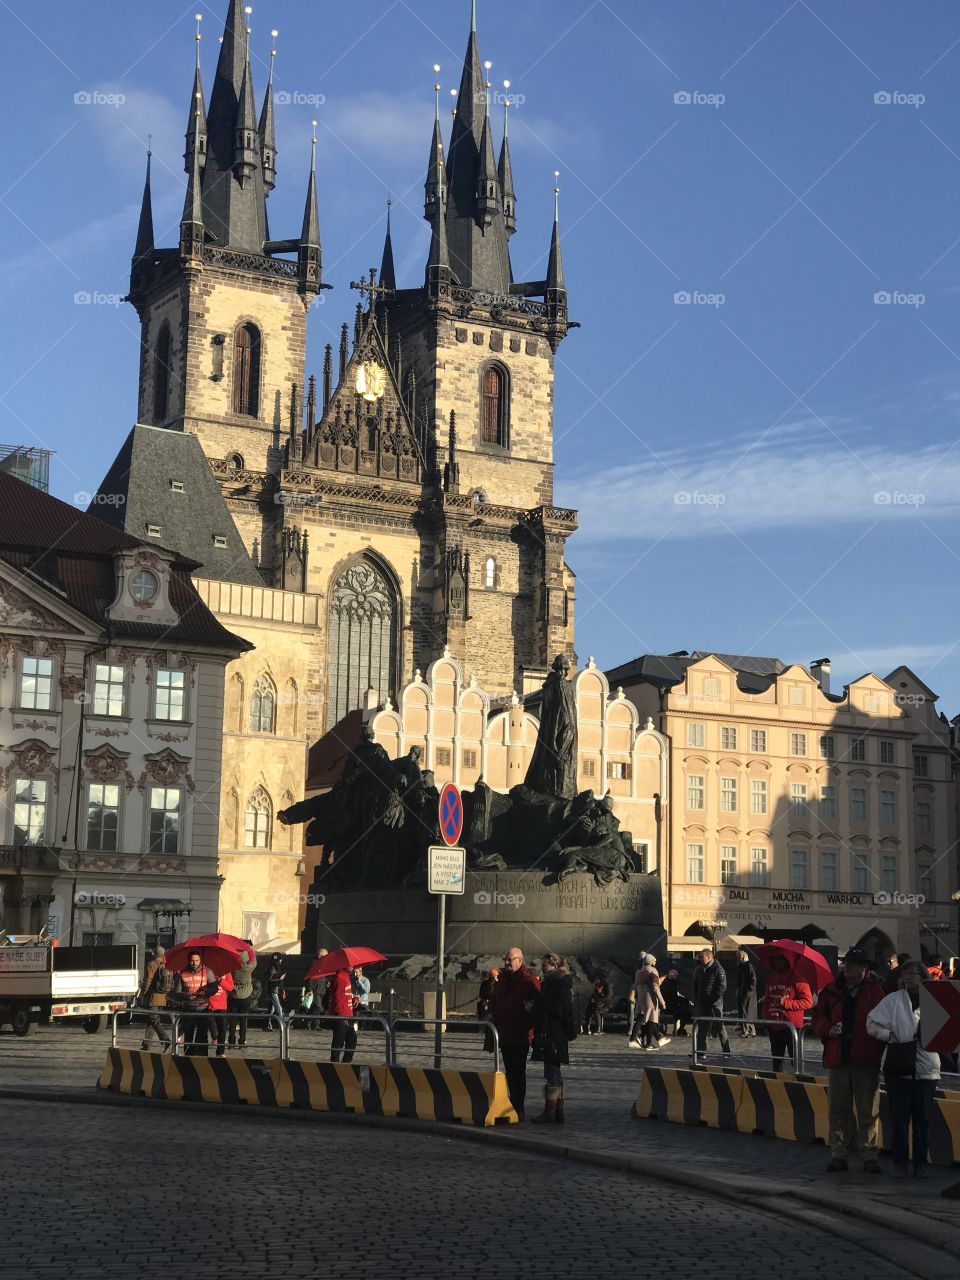 Praha that just amazing city especially in such a sunny day like this one !